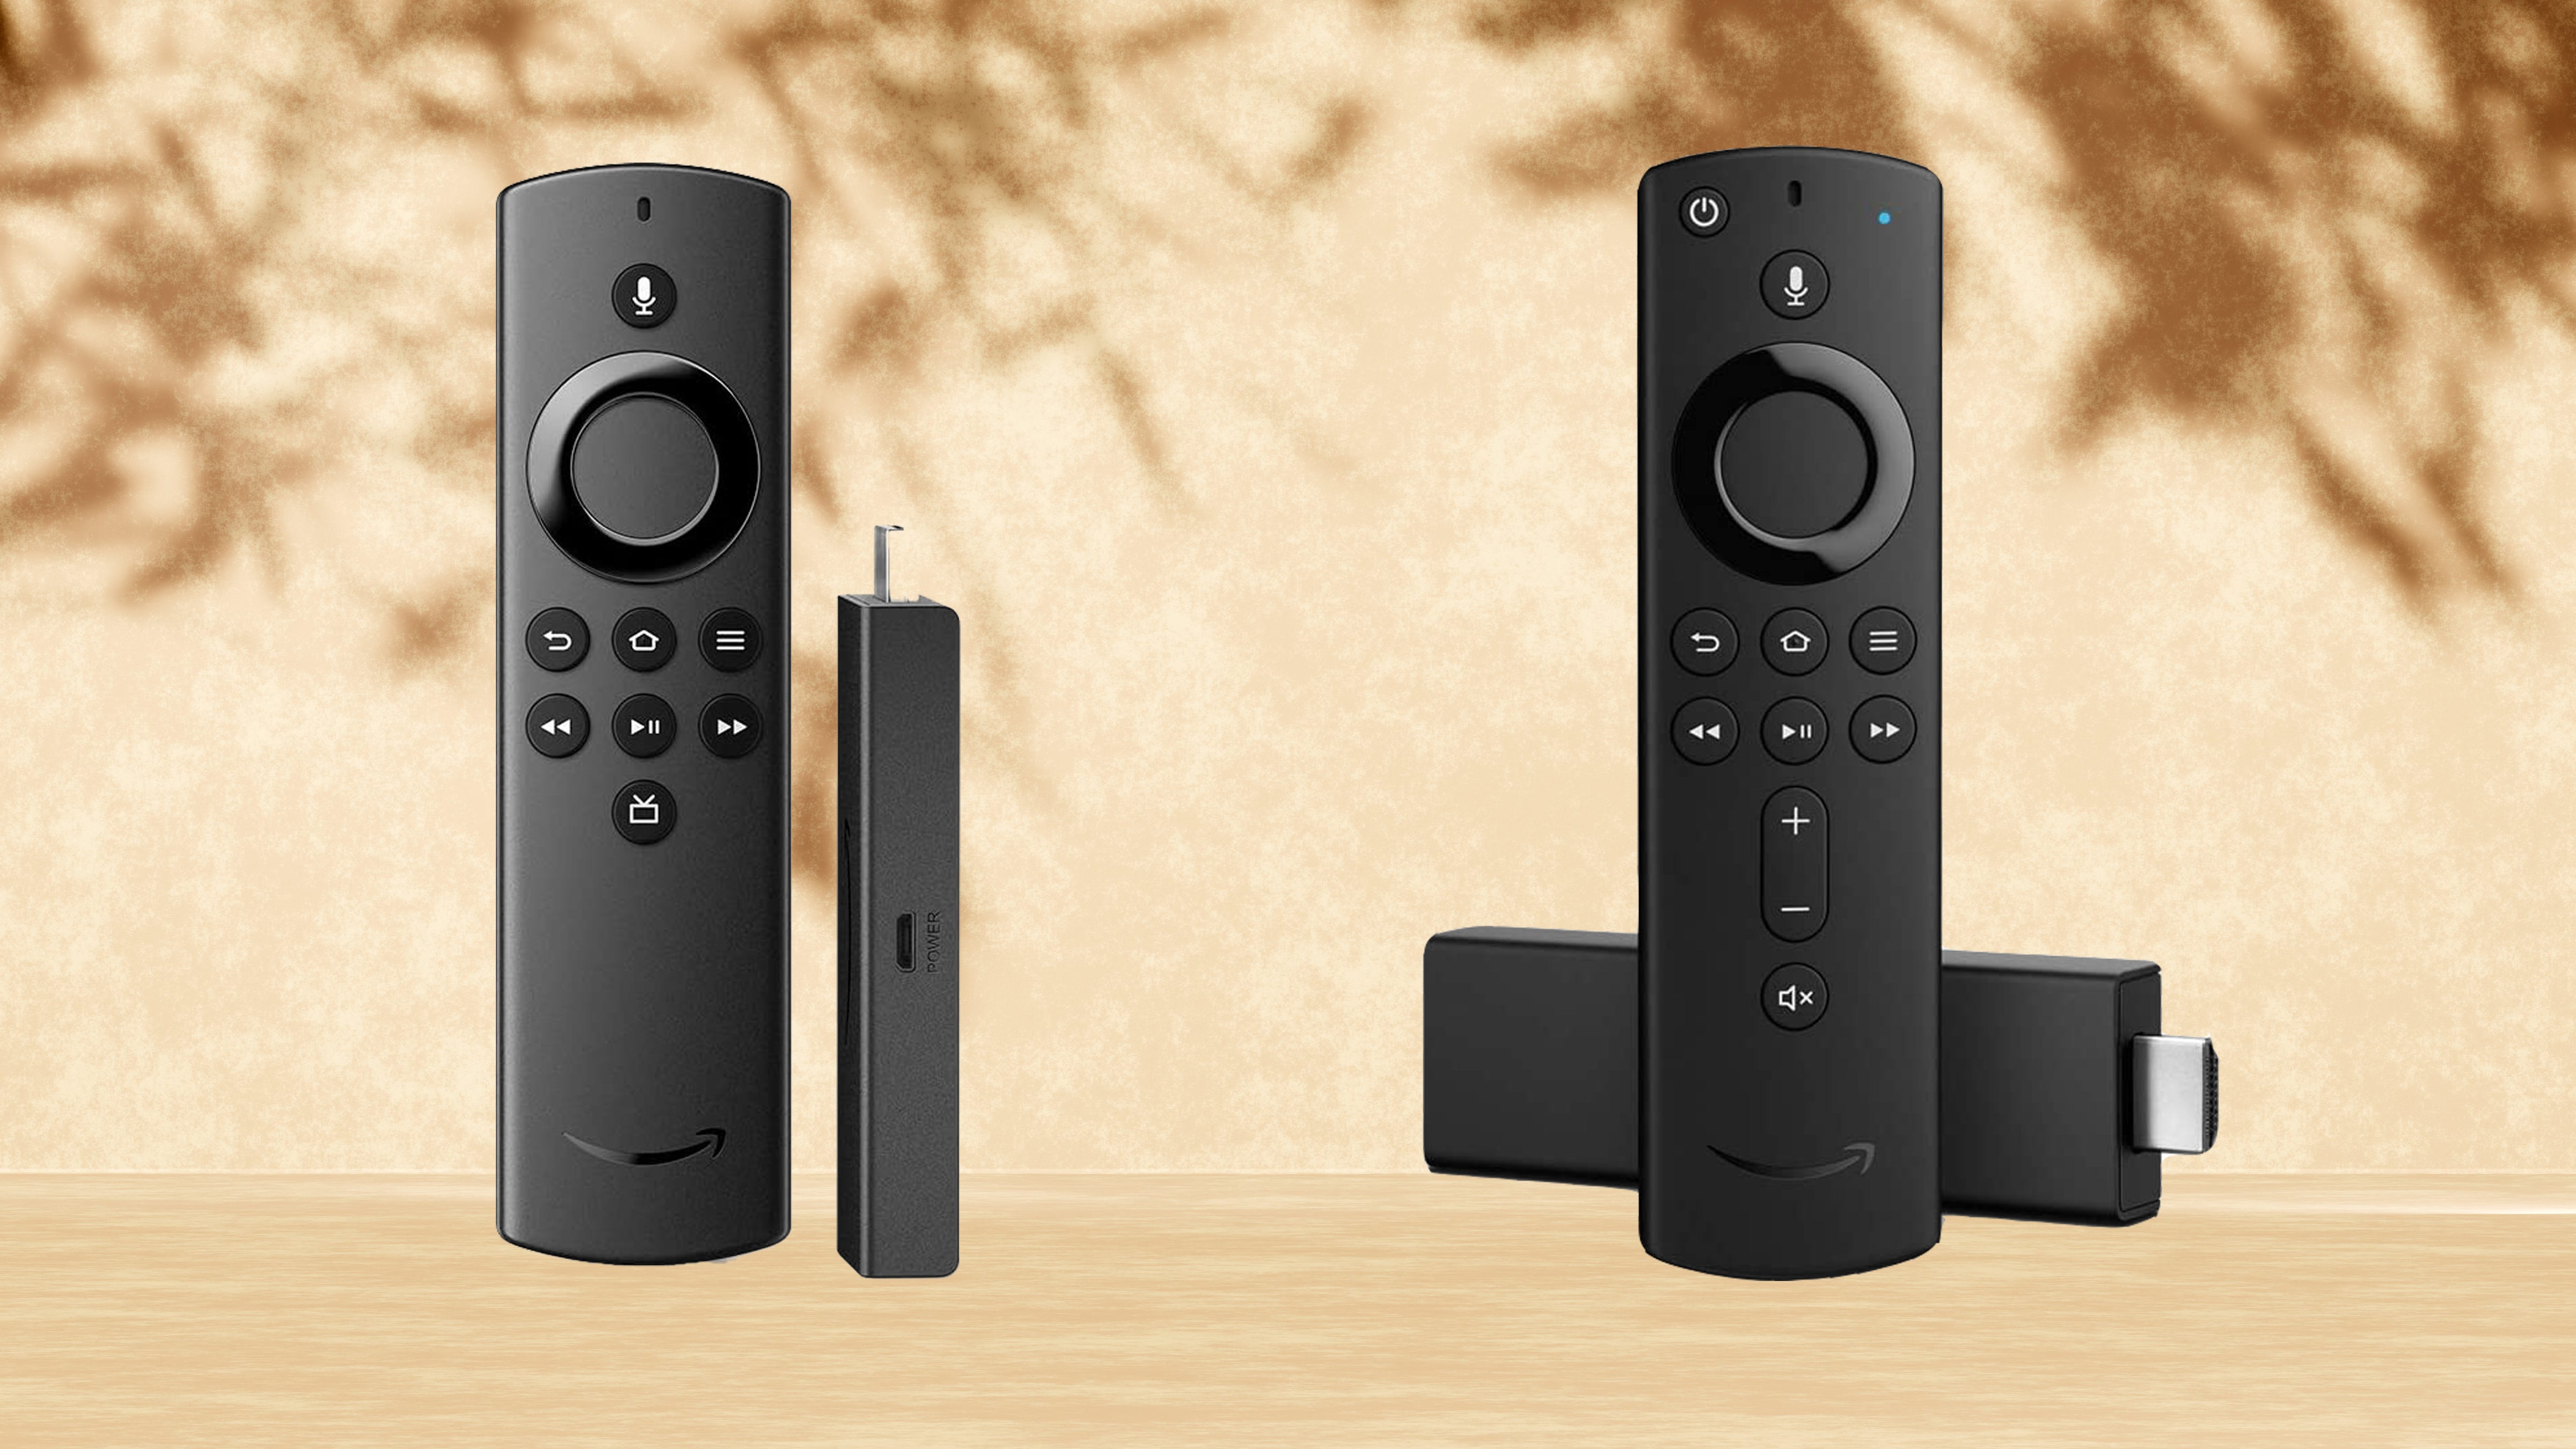 Amazon Fire Stick 4K: Get 24% off this top-rated streaming device